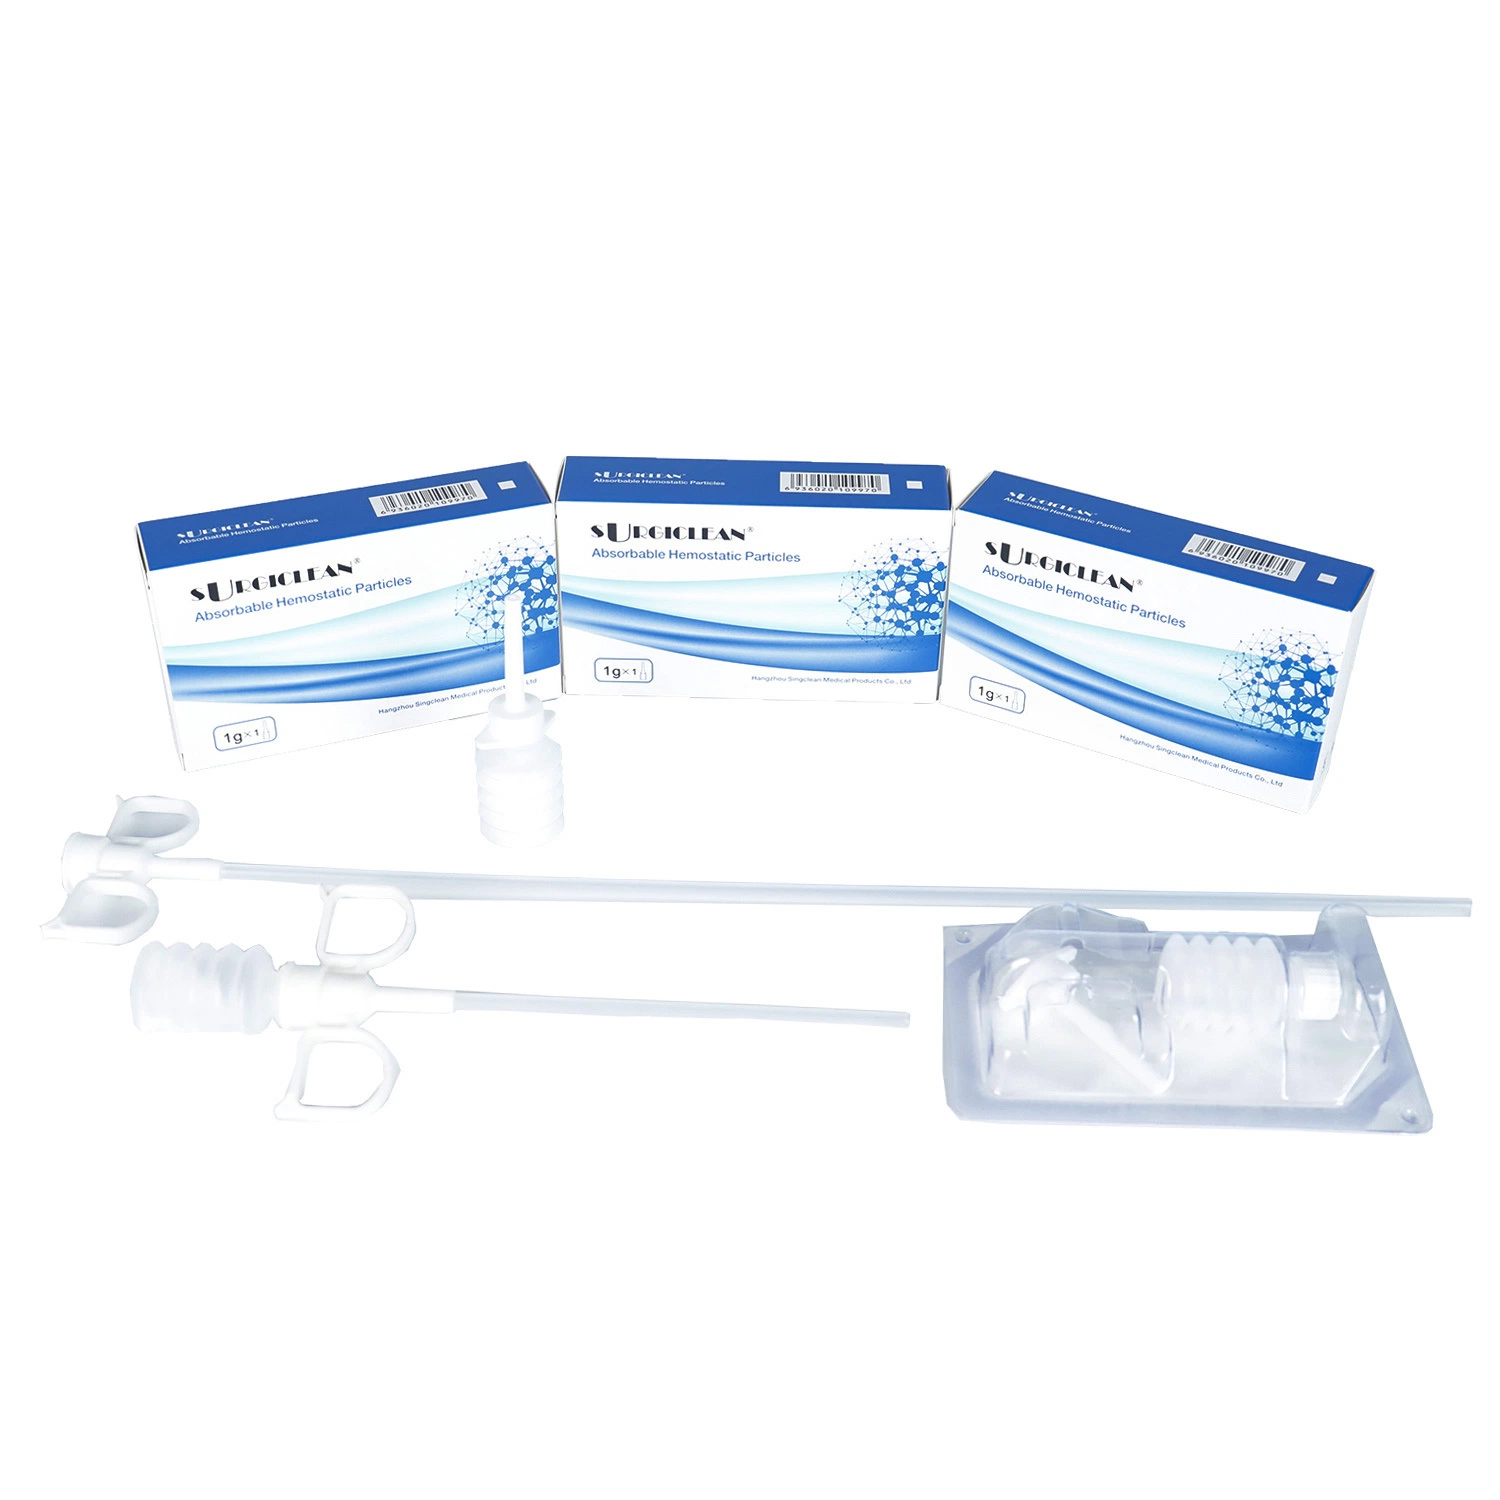 Made in China Absorbable Hemostatic Powder for Stop Bleeding for Surgical Use